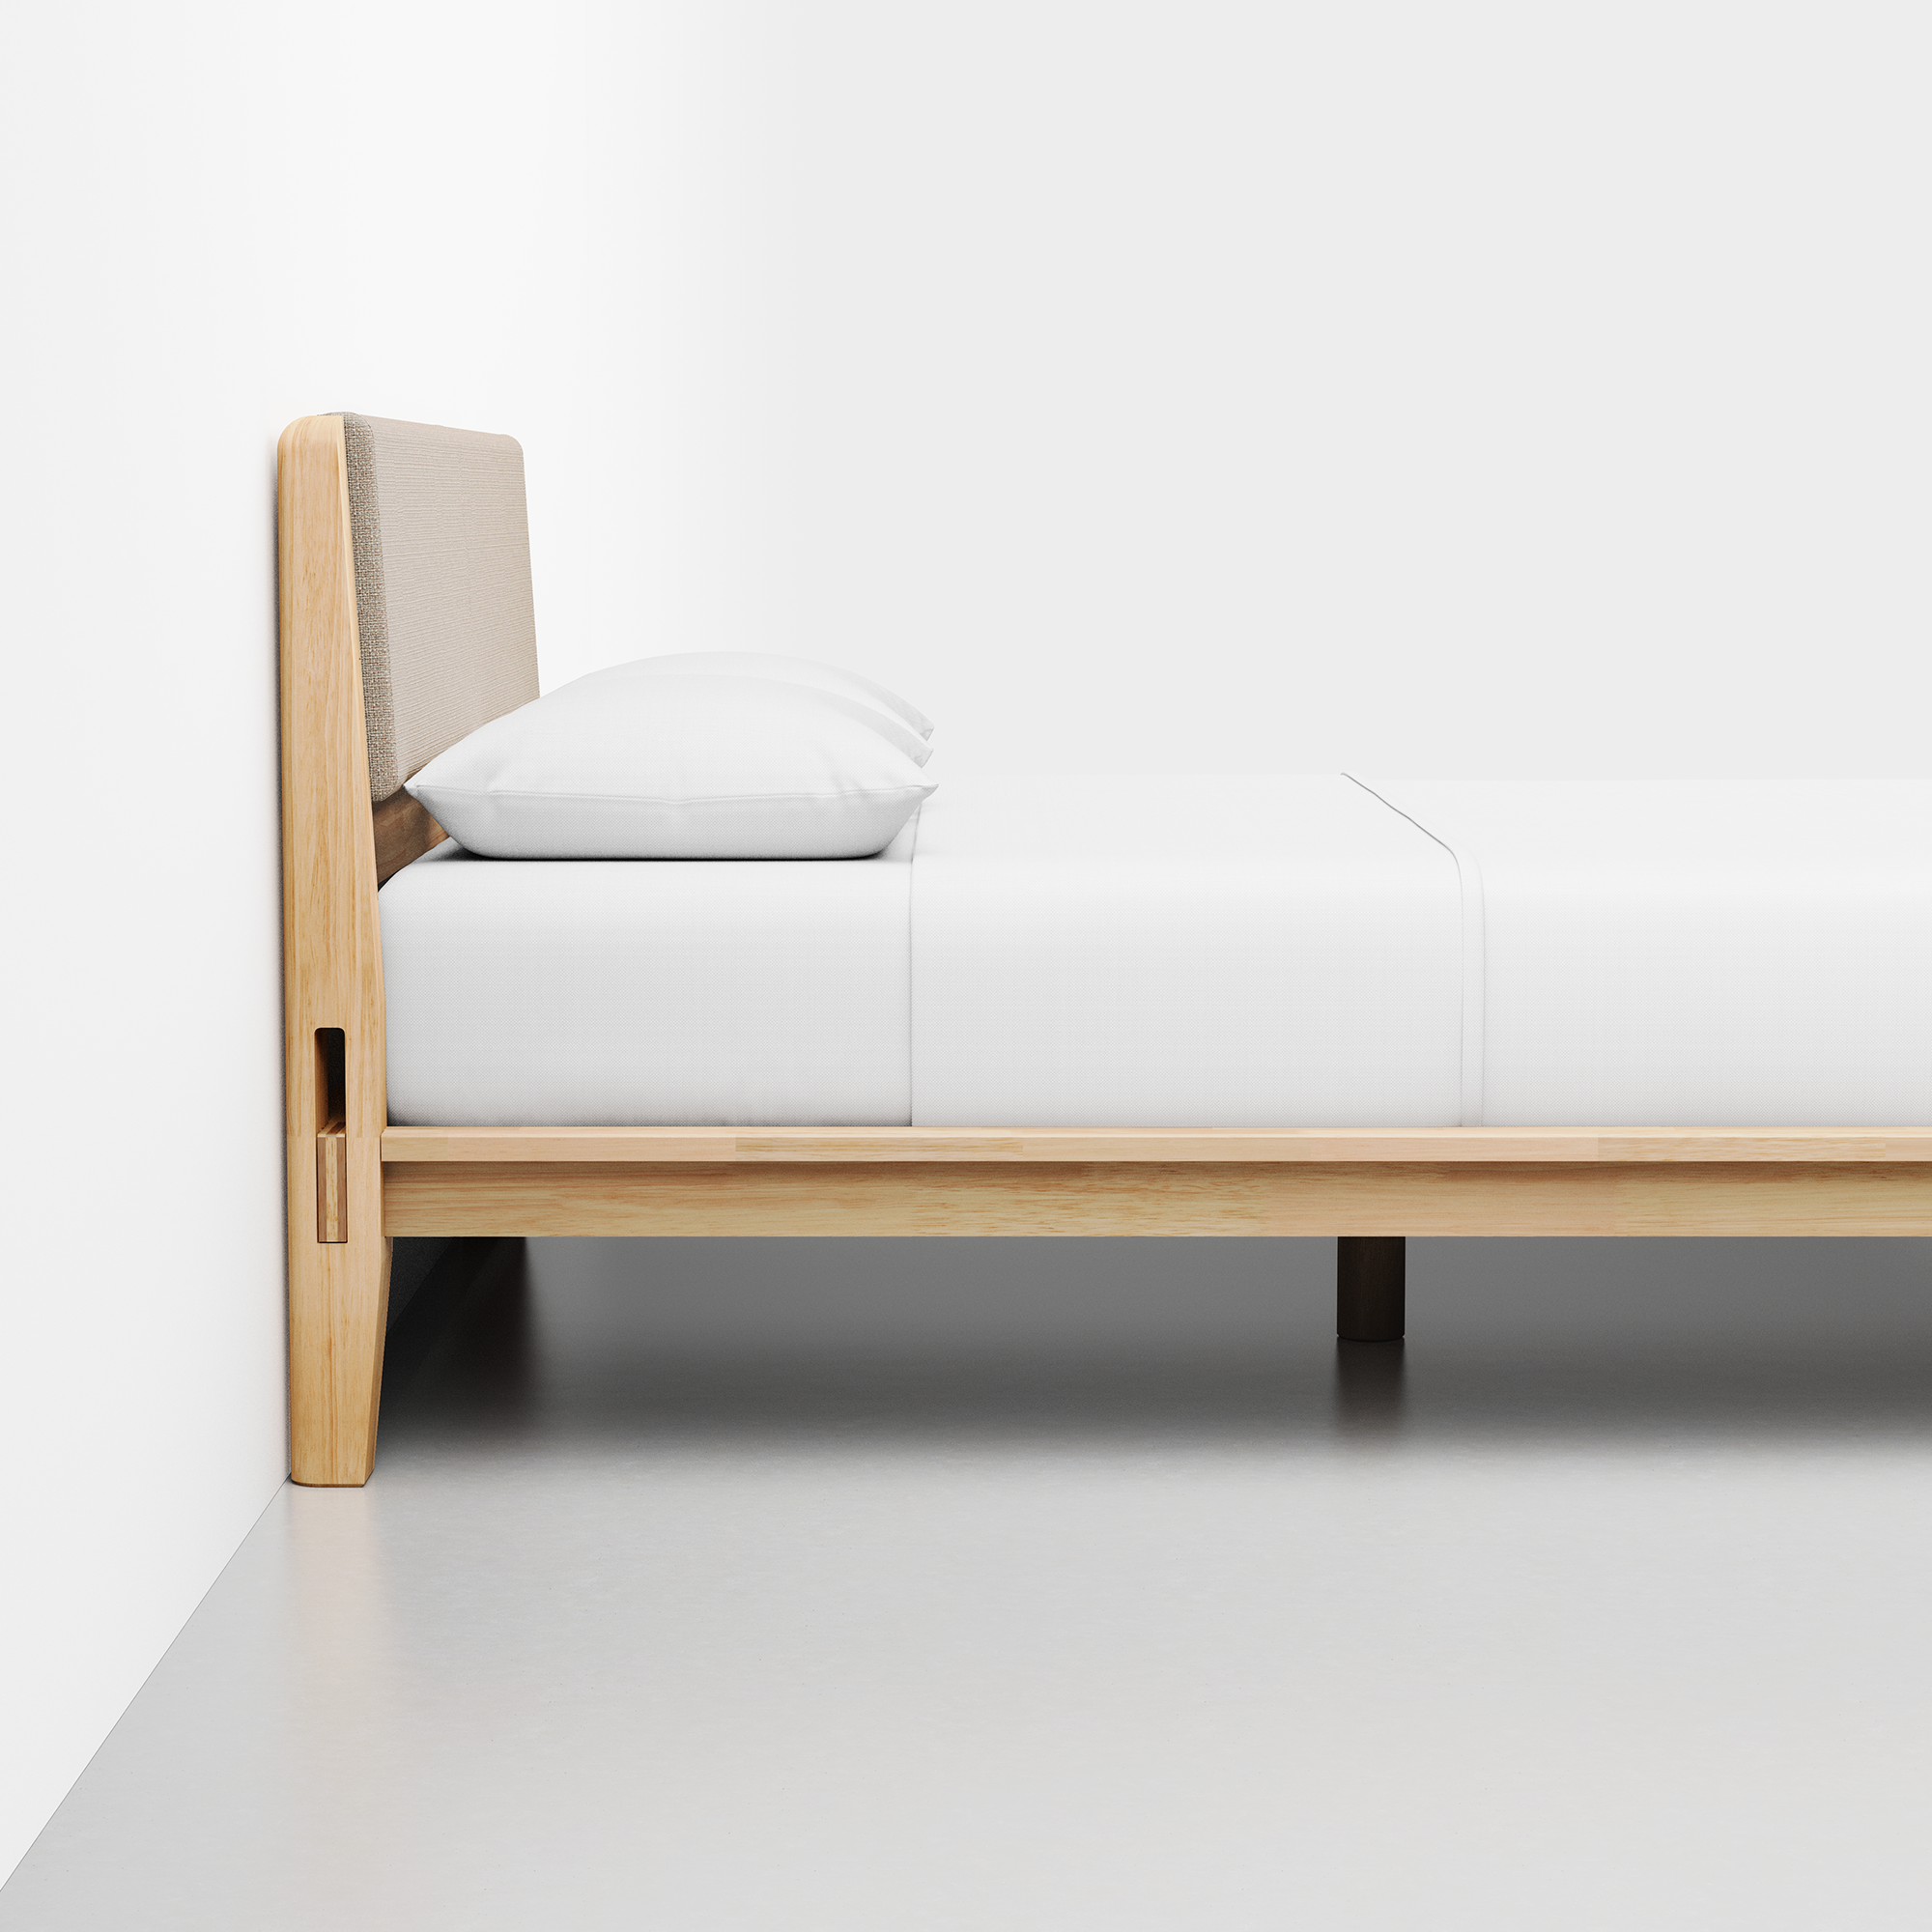 The Bed (Natural / HB Cushion Dune) - Render - Side